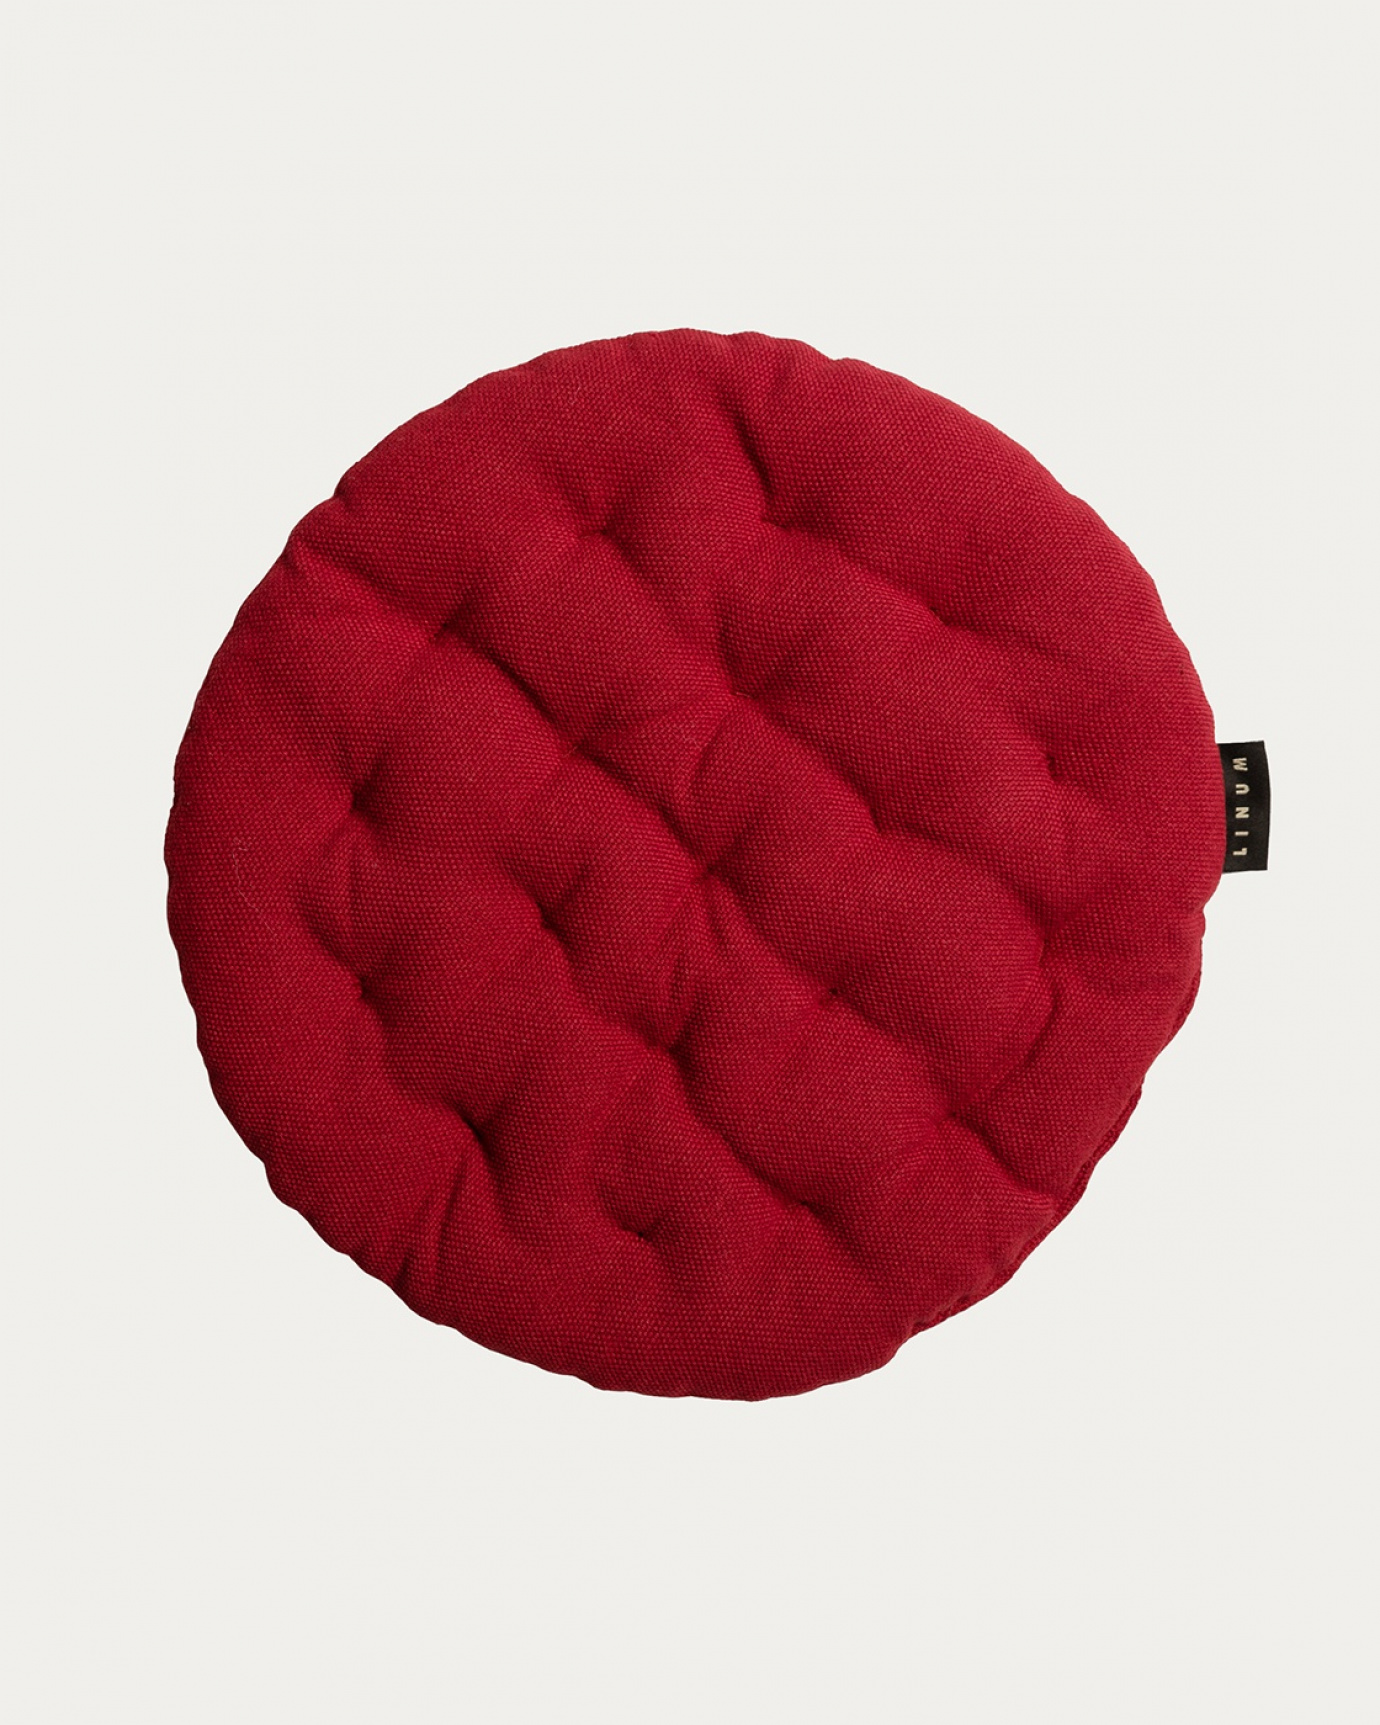 Product image red PEPPER seat cushion made of soft cotton with recycled polyester filling from LINUM DESIGN. Size ø37 cm.